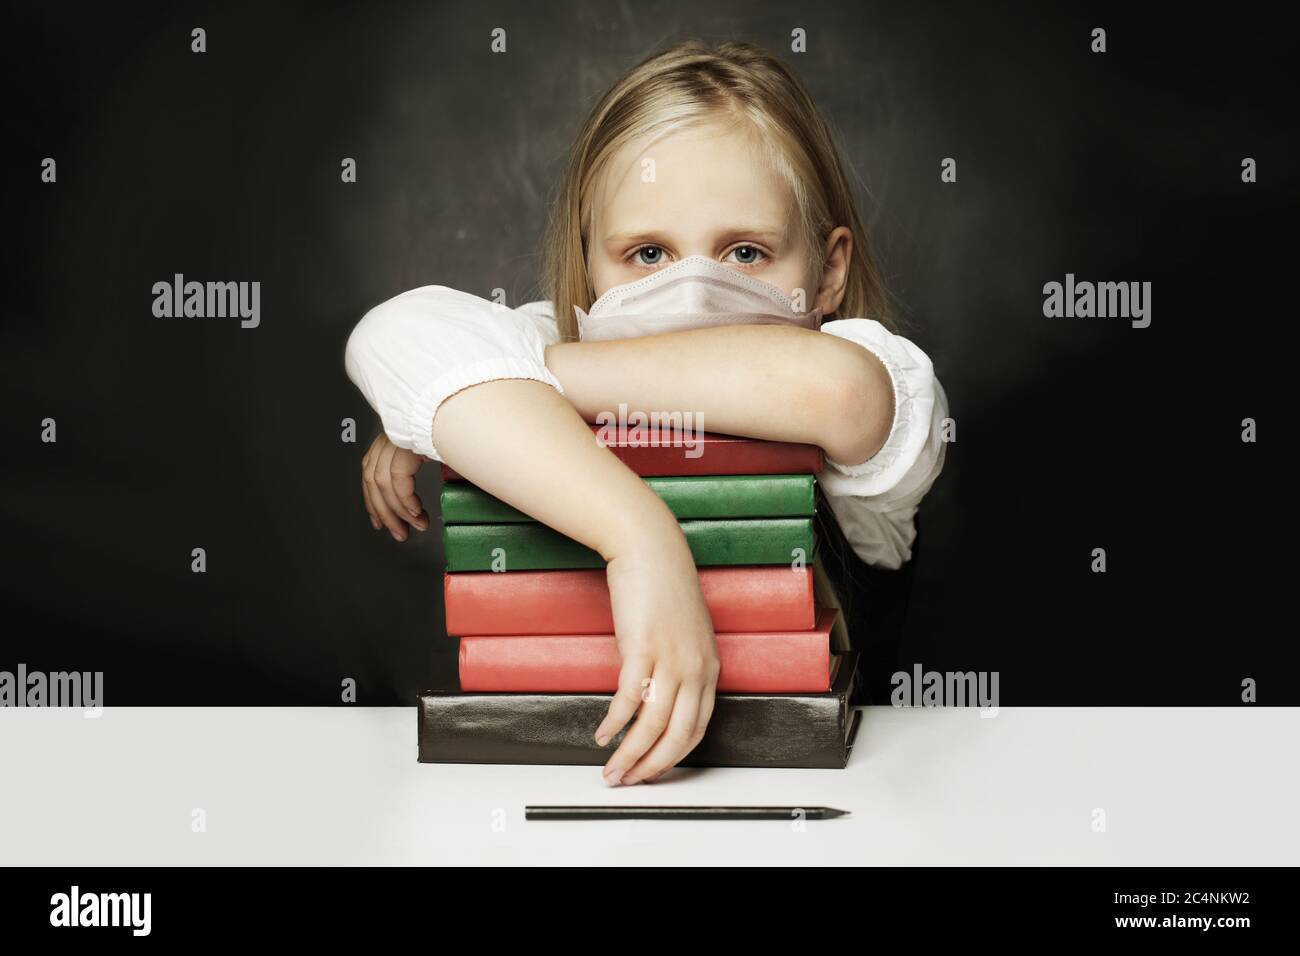 Tired child girl in protective medical mask on black background Stock Photo